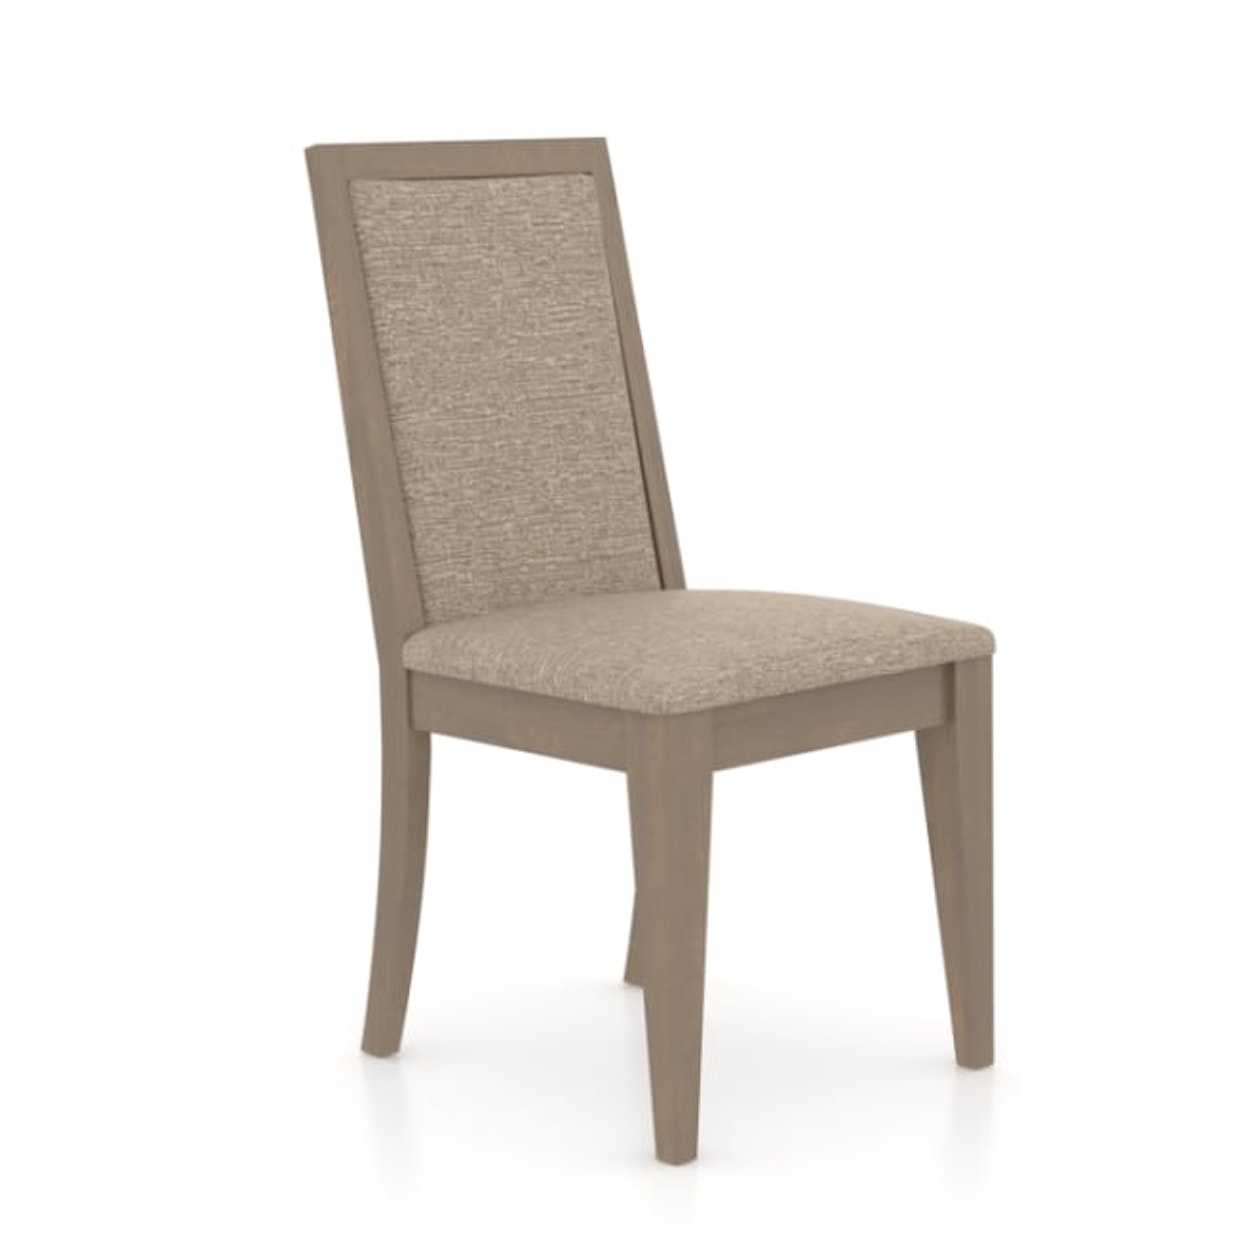 Canadel Gourmet Upholstered Side Chair